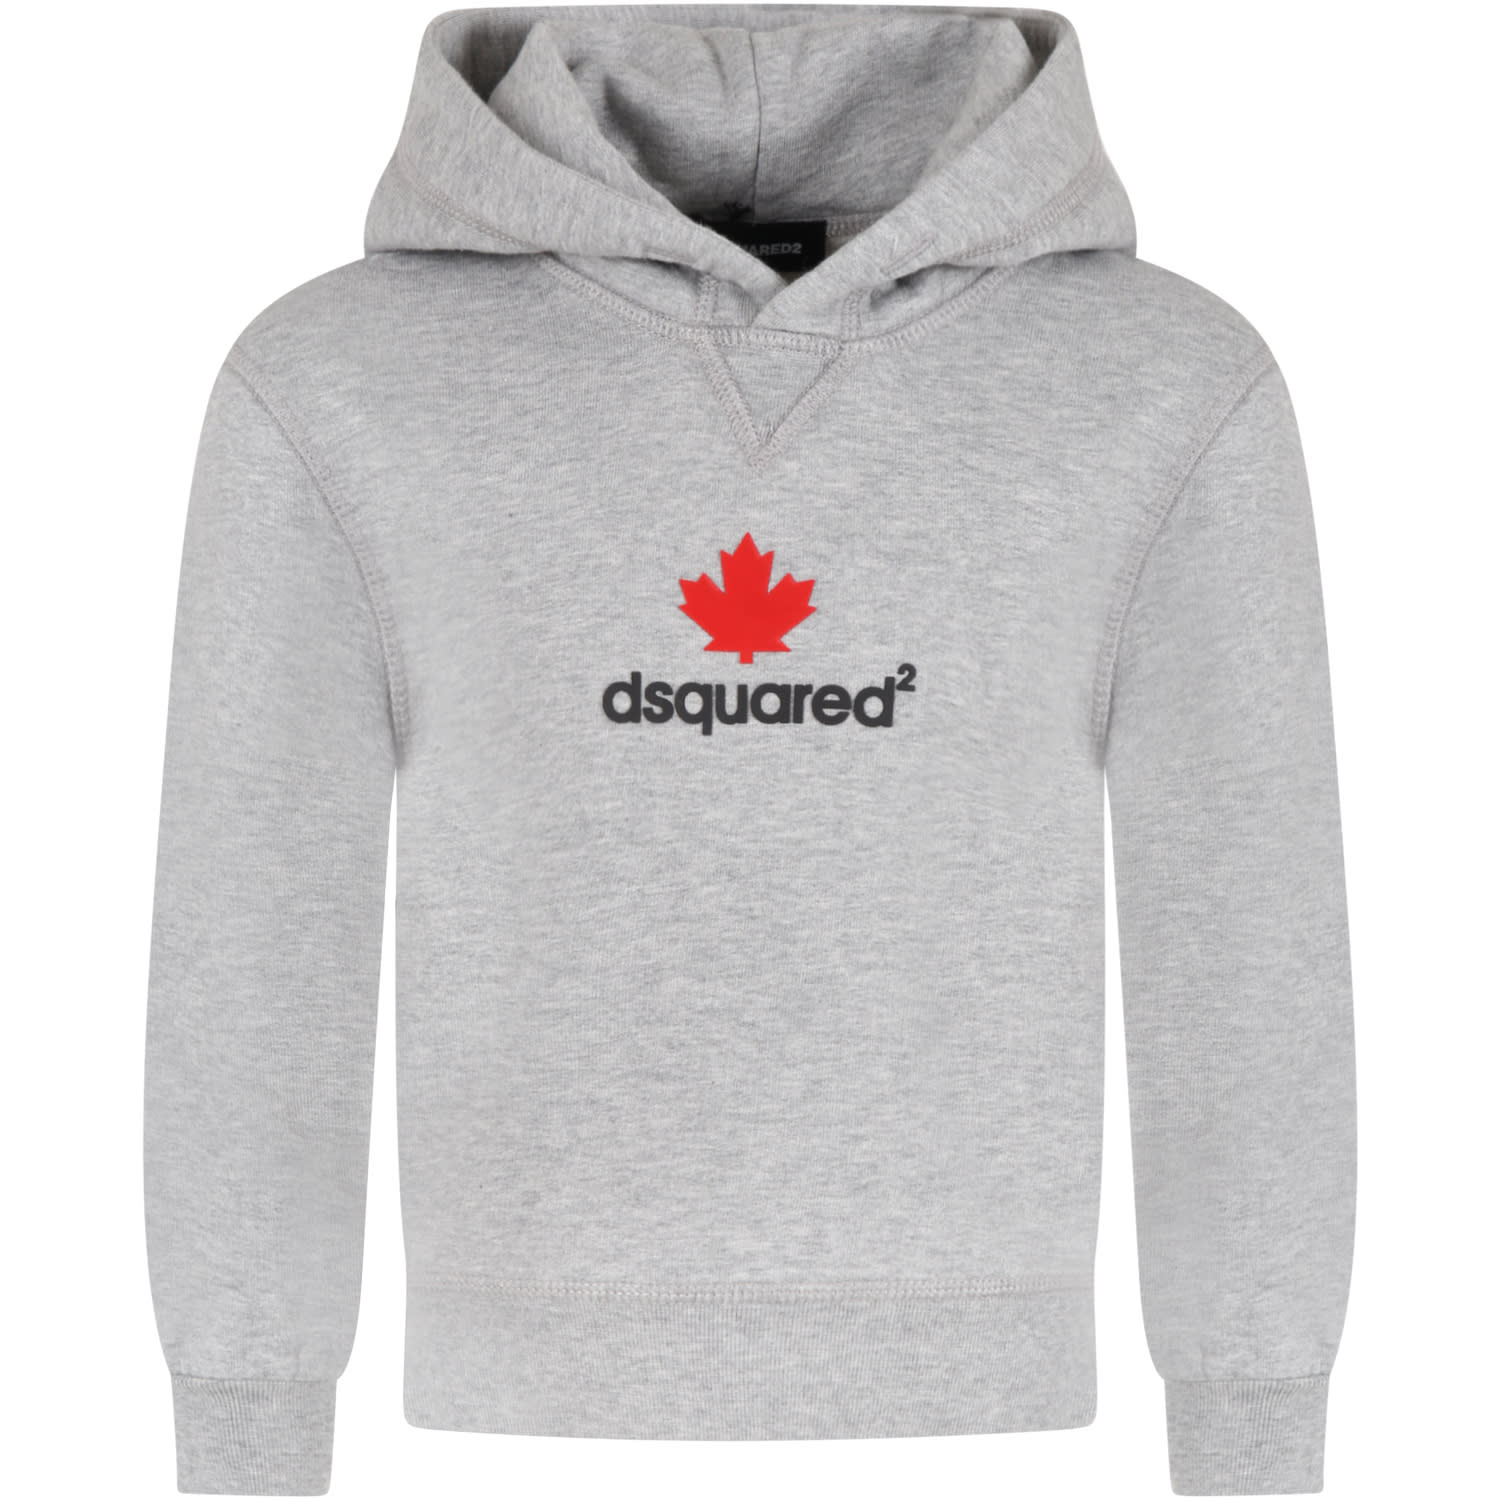 Dsquared2 Gray Sweatshirt For Kids With Logo